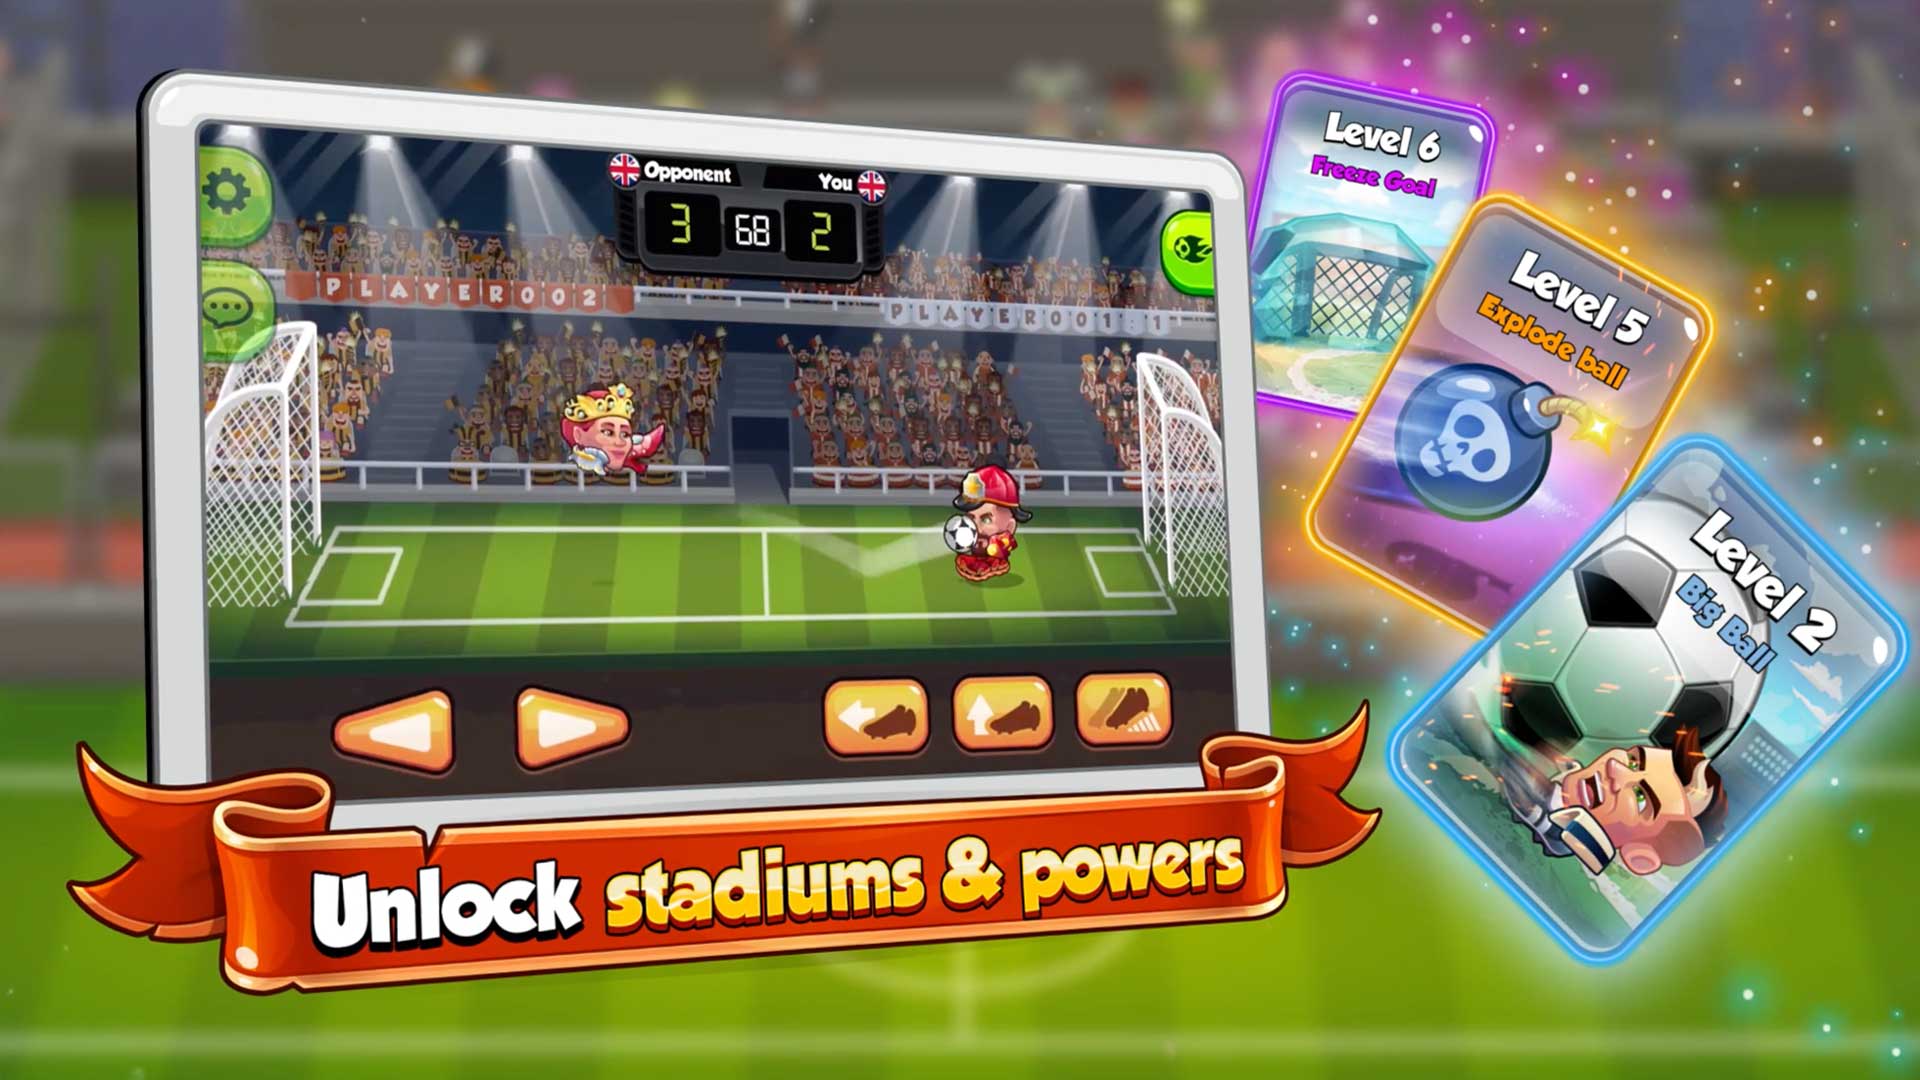 Head Ball 2 APK Download for Android Free